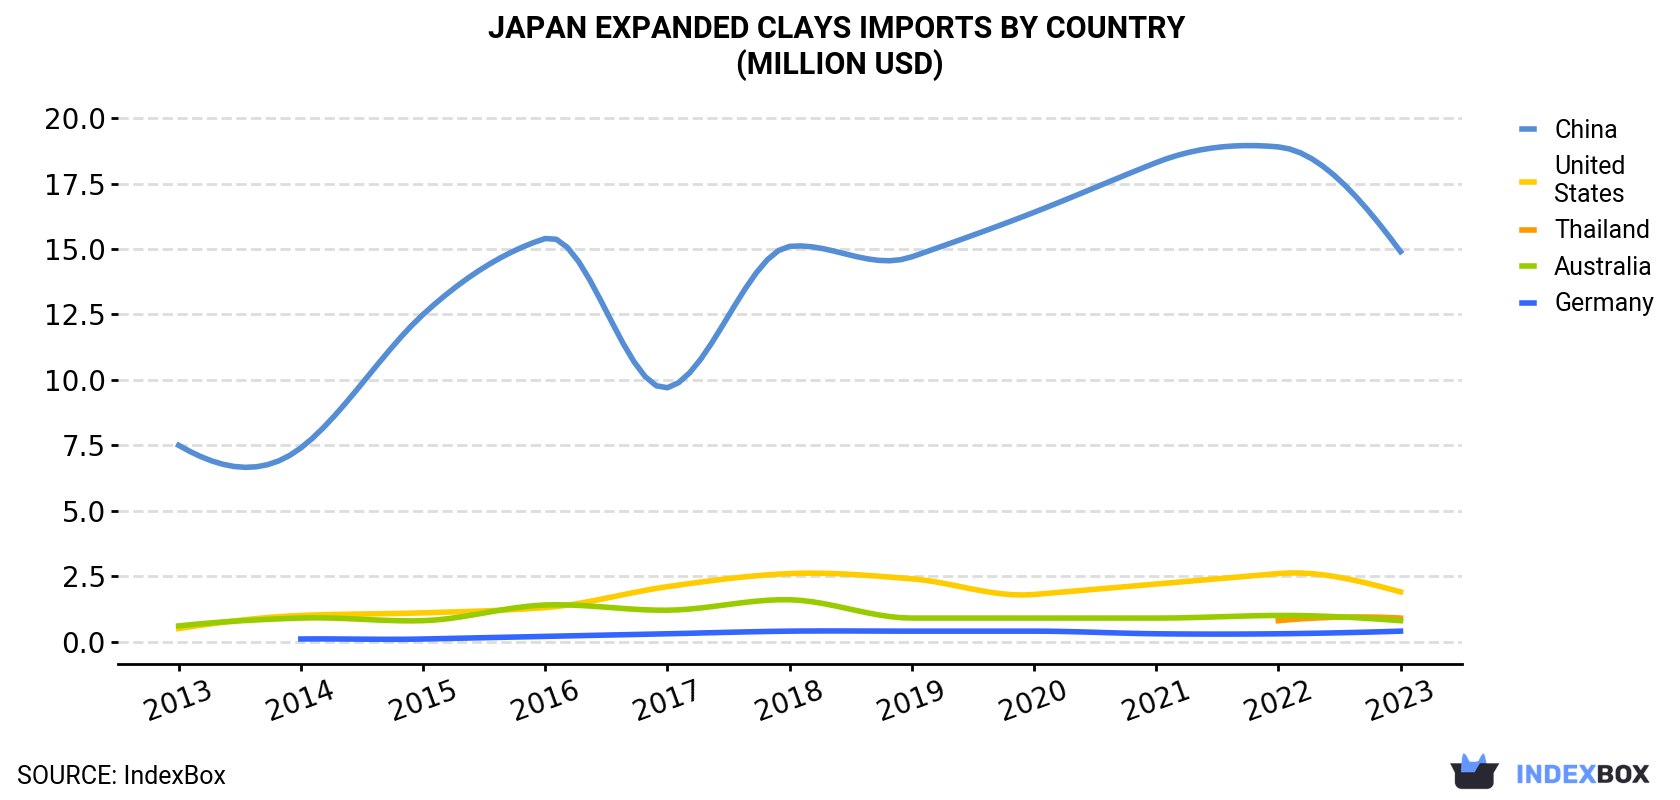 Japan Expanded Clays Imports By Country (Million USD)